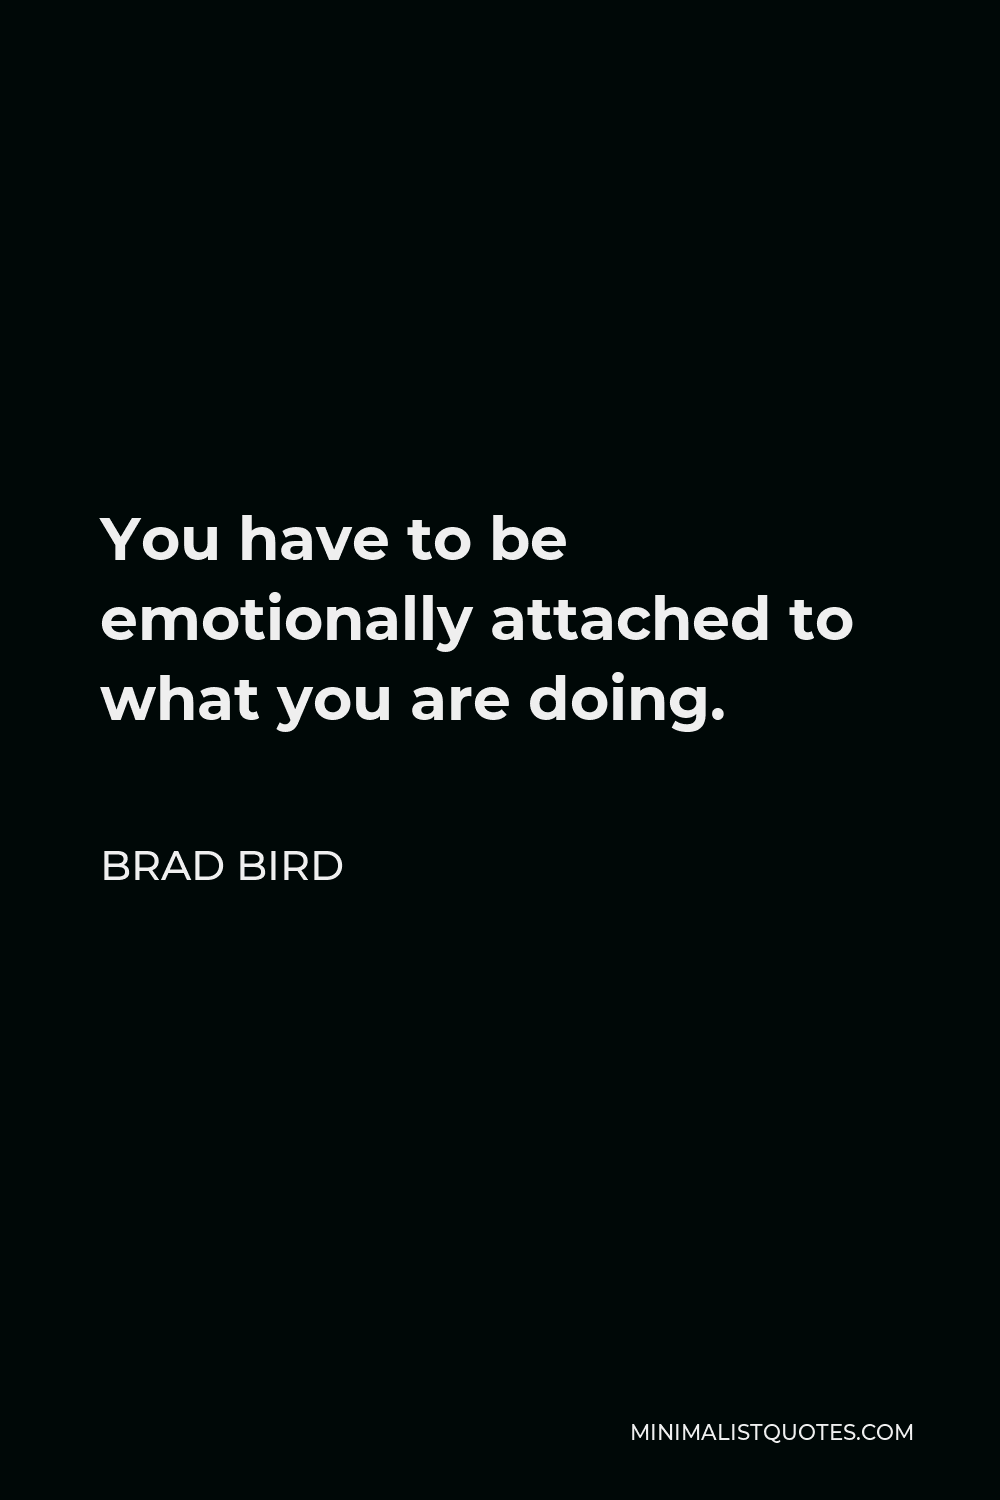 Brad Bird Quote - You have to be emotionally attached to what you are doing.